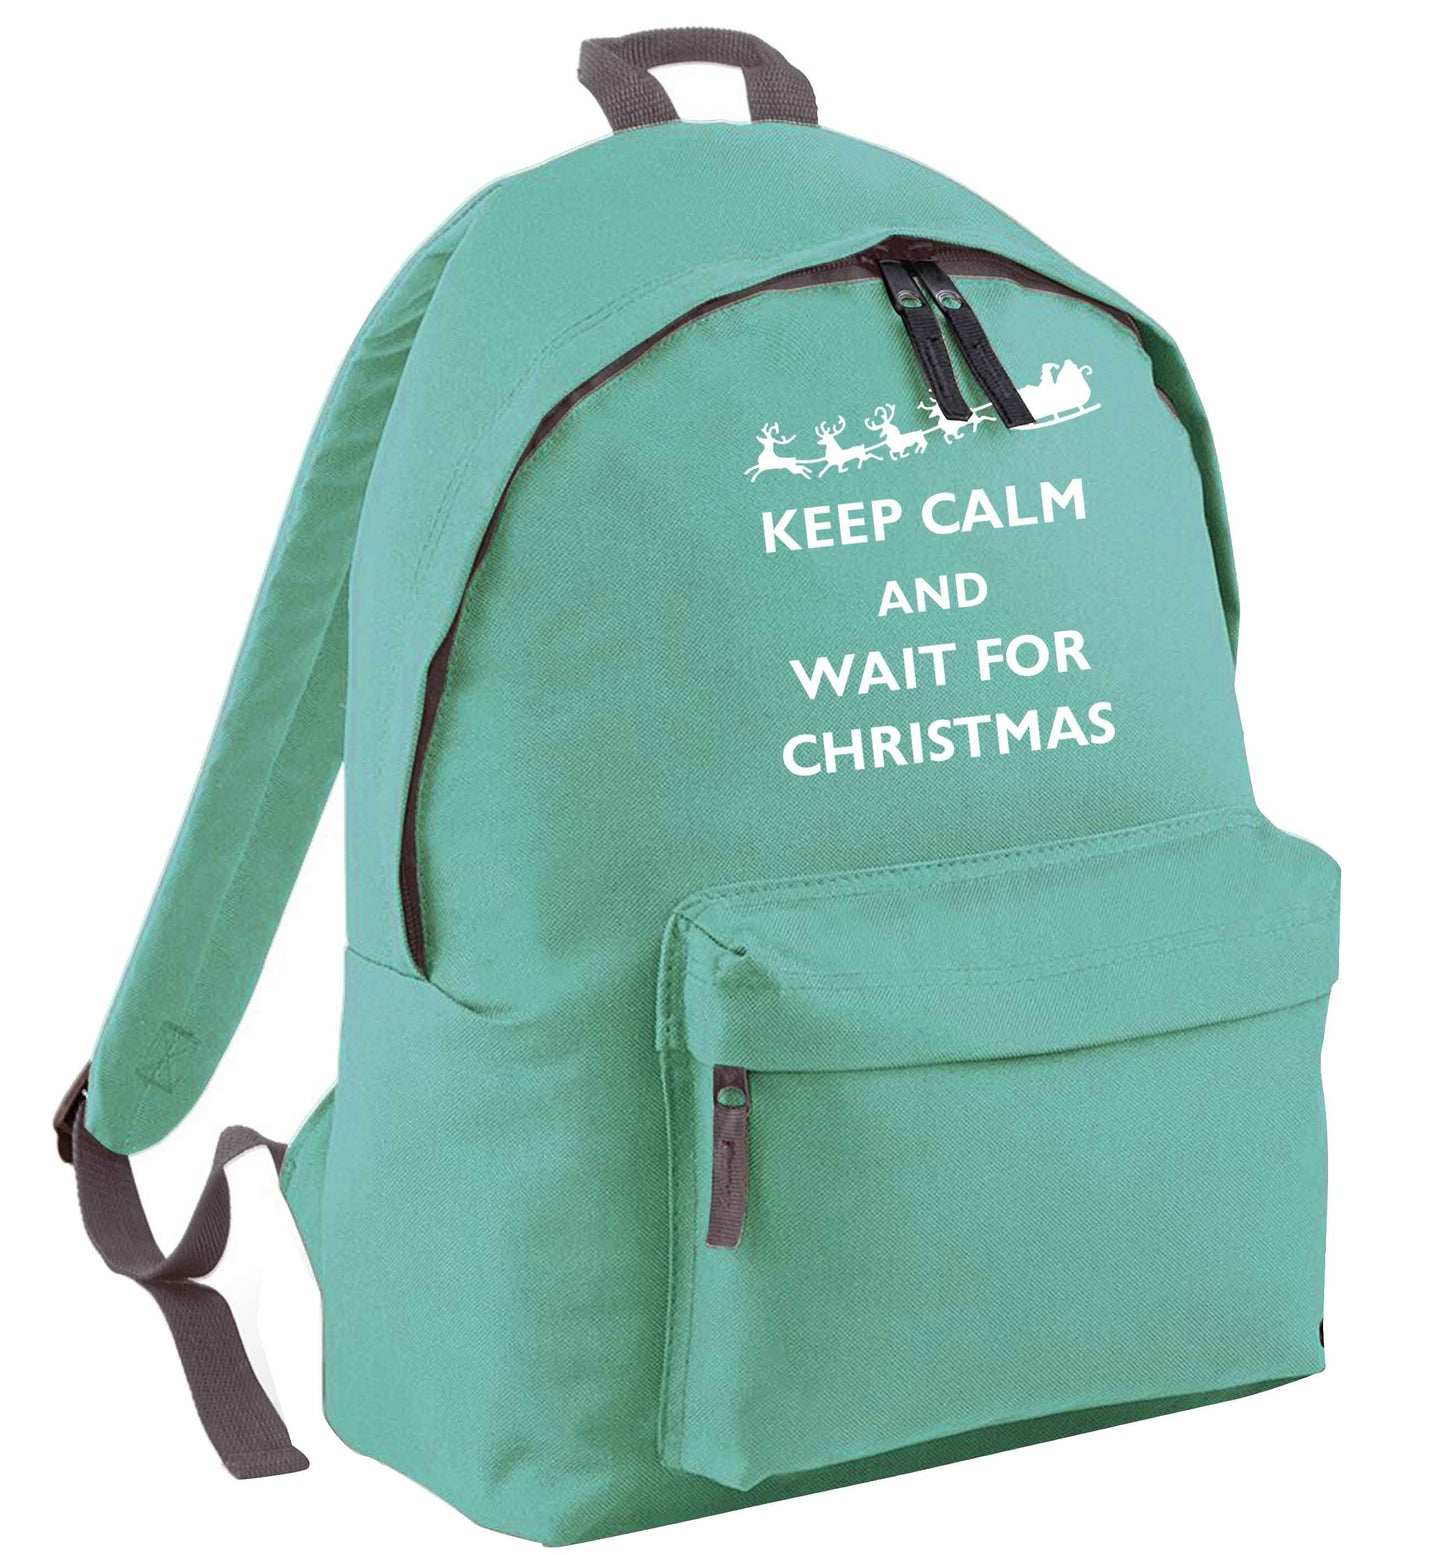 Keep calm and wait for Christmas mint adults backpack